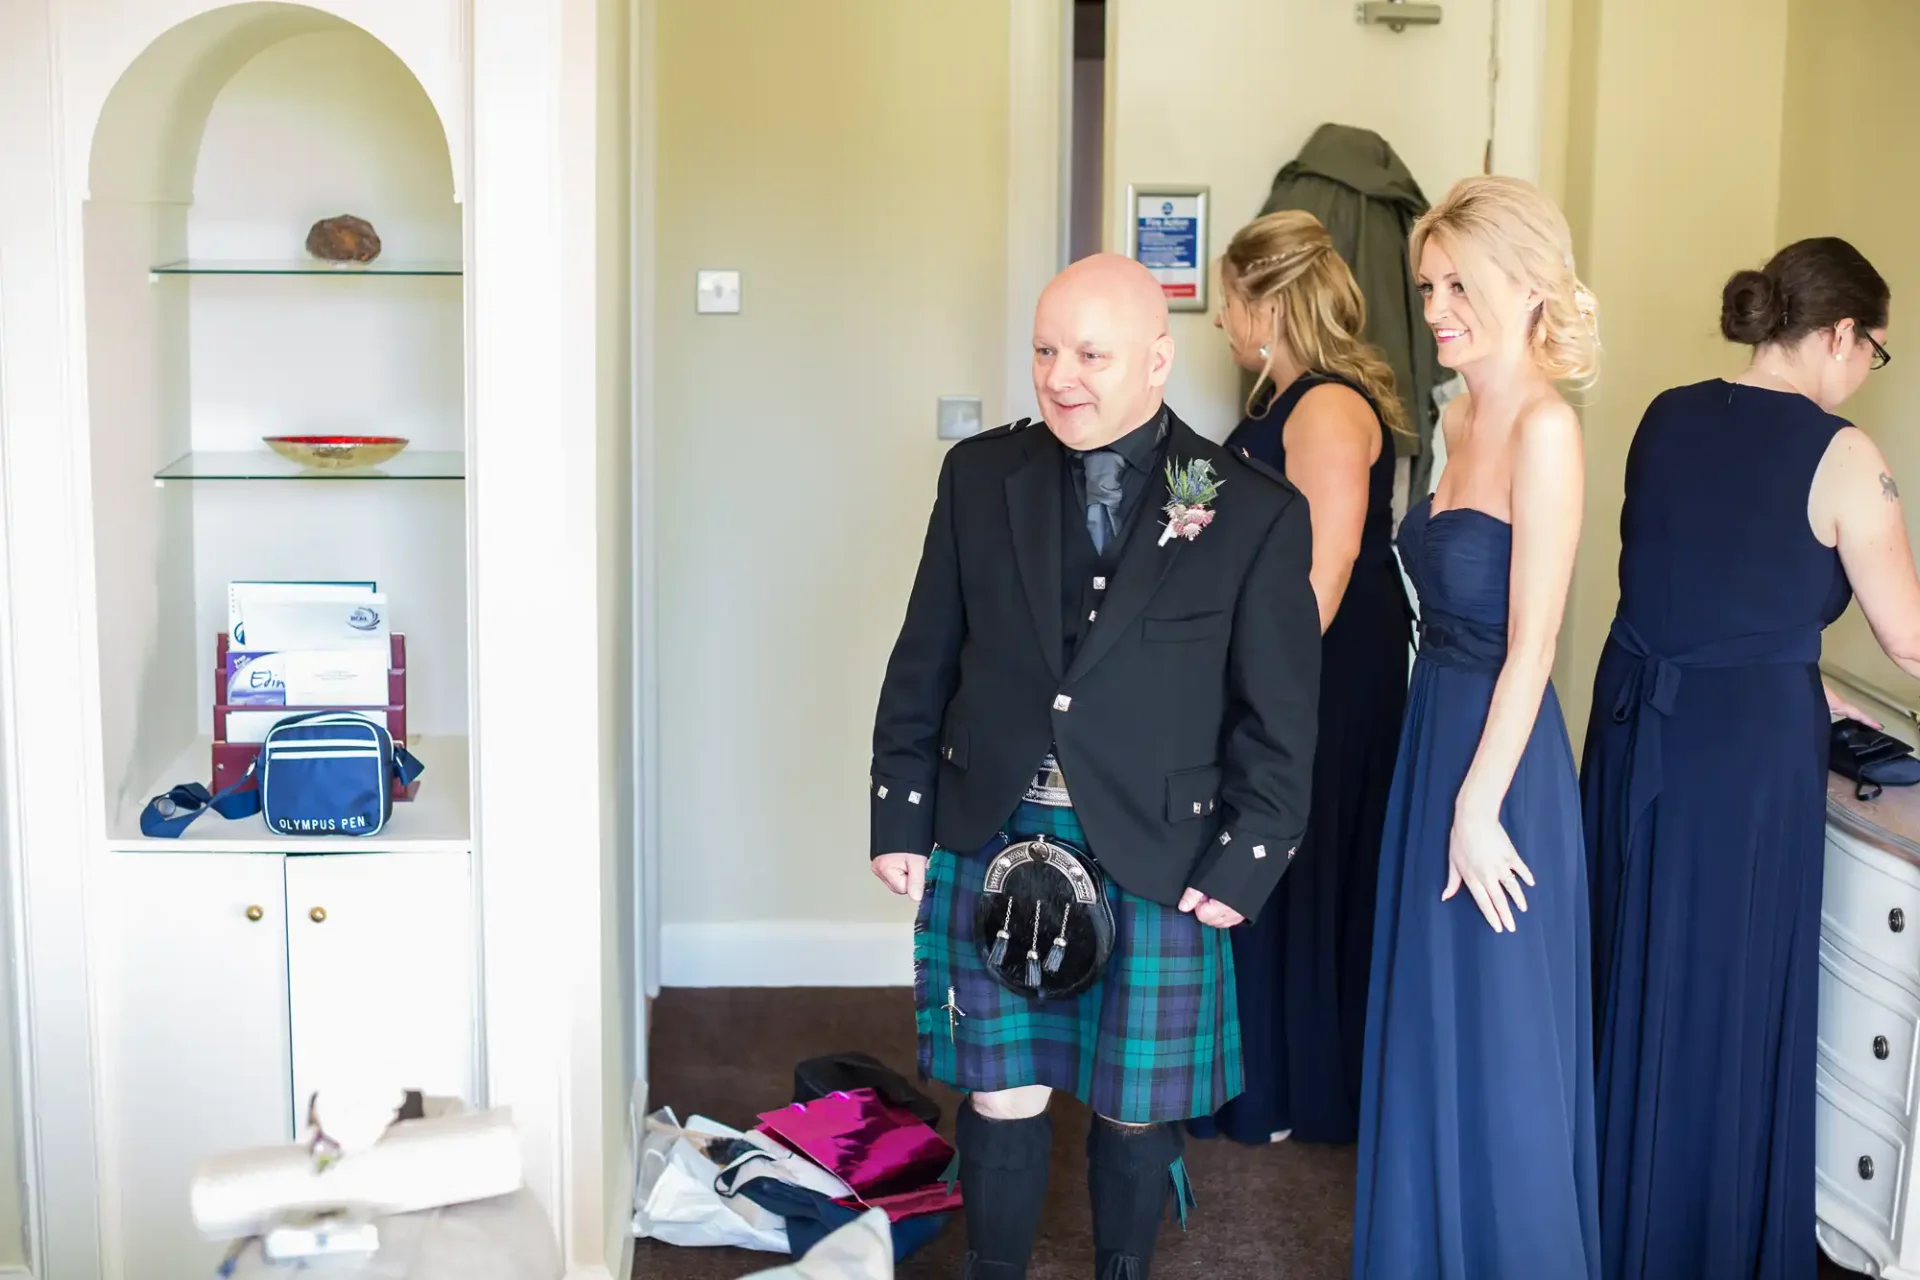 A bald man in a kilt and women in formal dresses in a room, clutter visible on the floor and furniture.